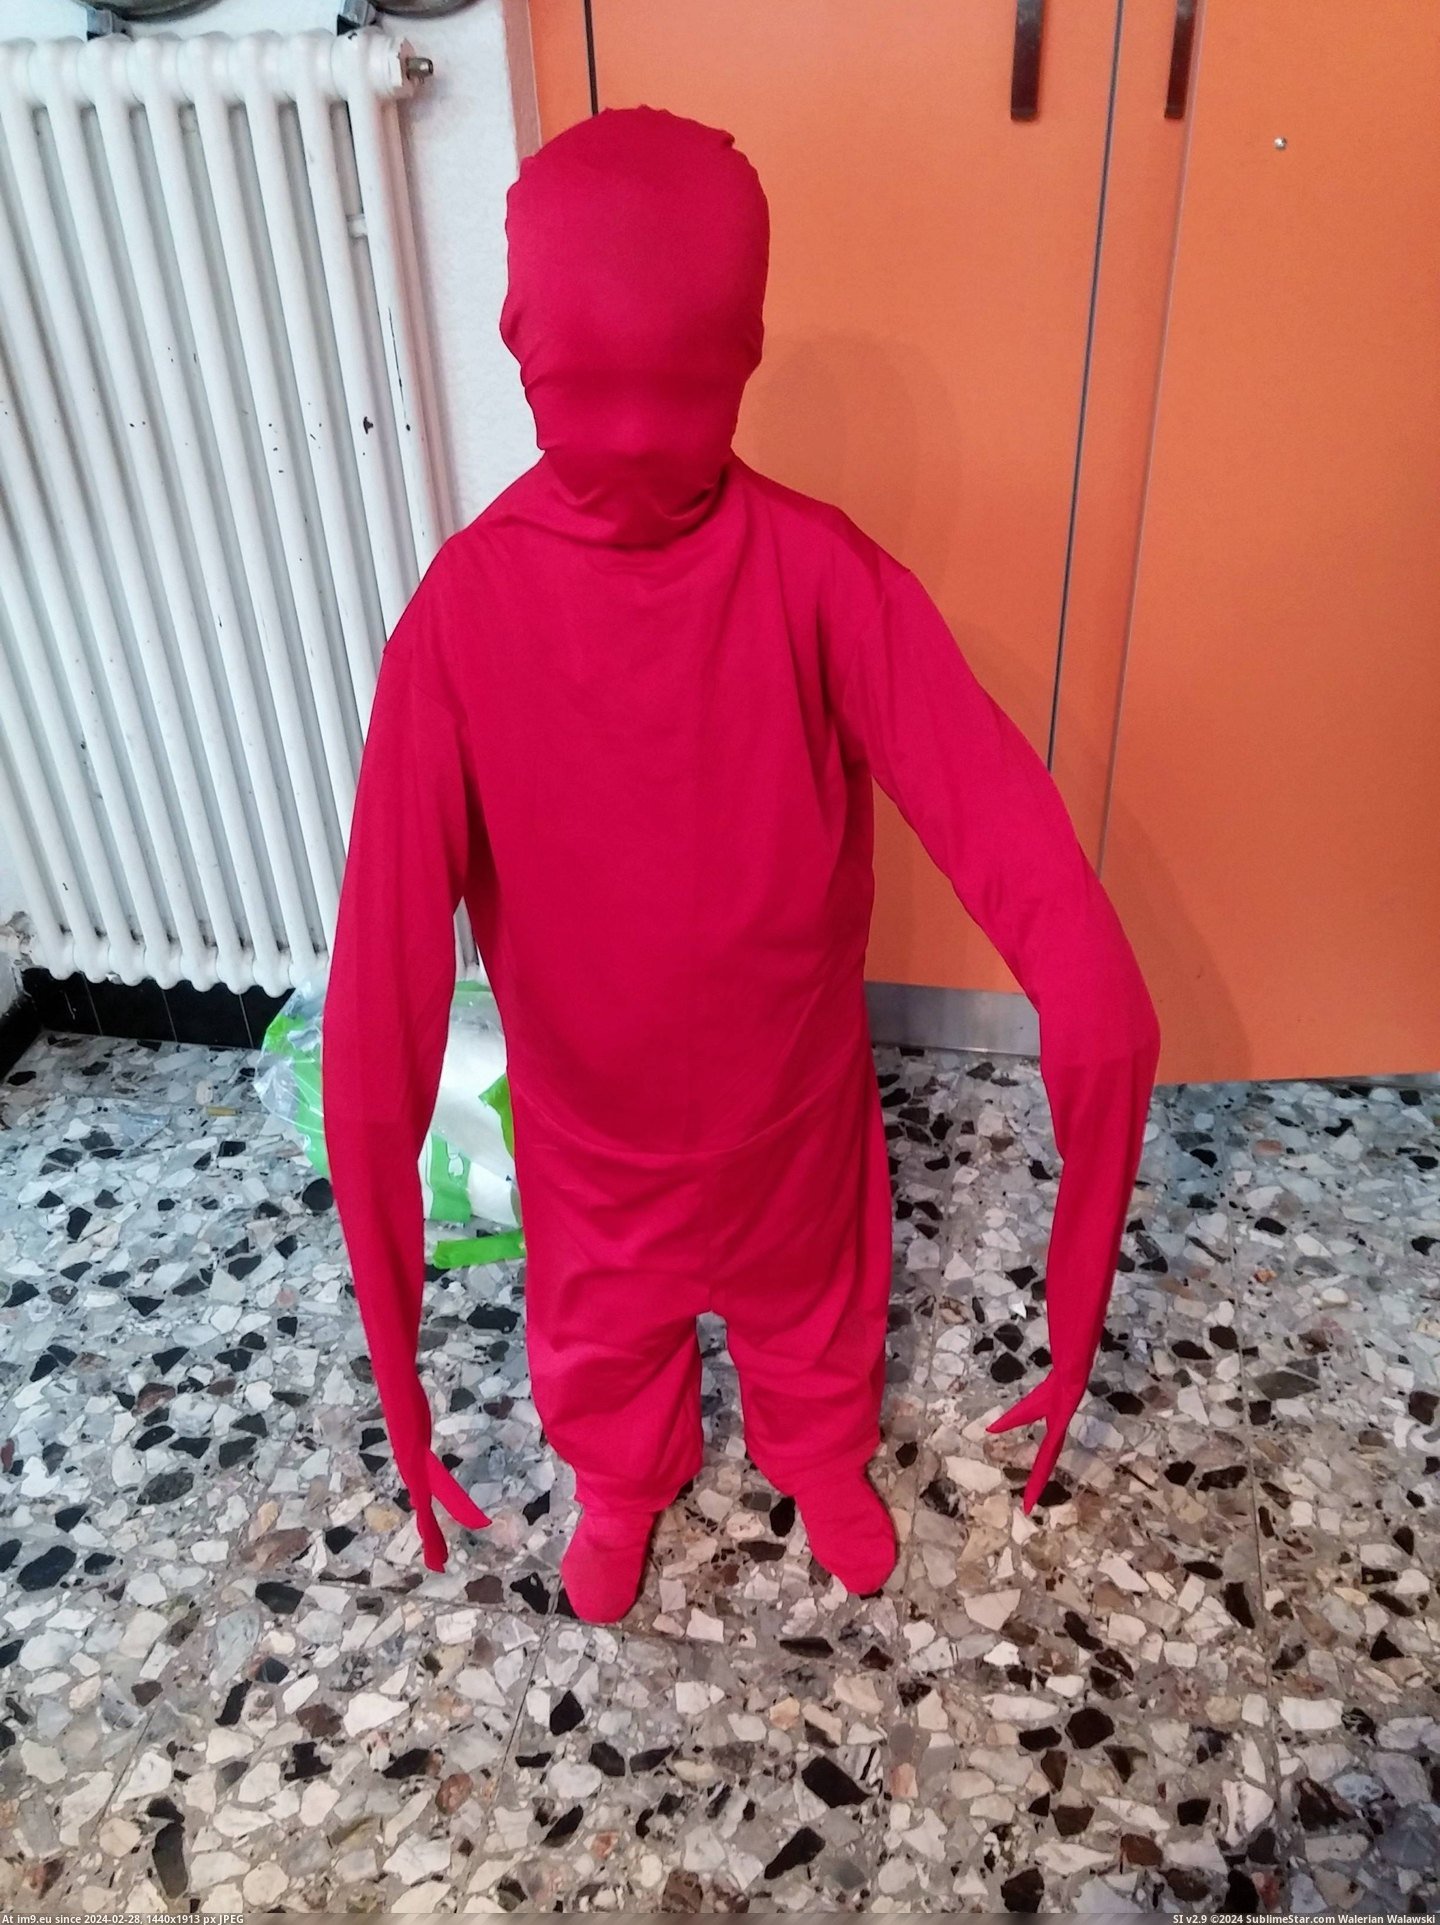 #Son #Terrifying #Morph #Suit [Pics] my son found my morph suit and it's terrifying Pic. (Image of album My r/PICS favs))